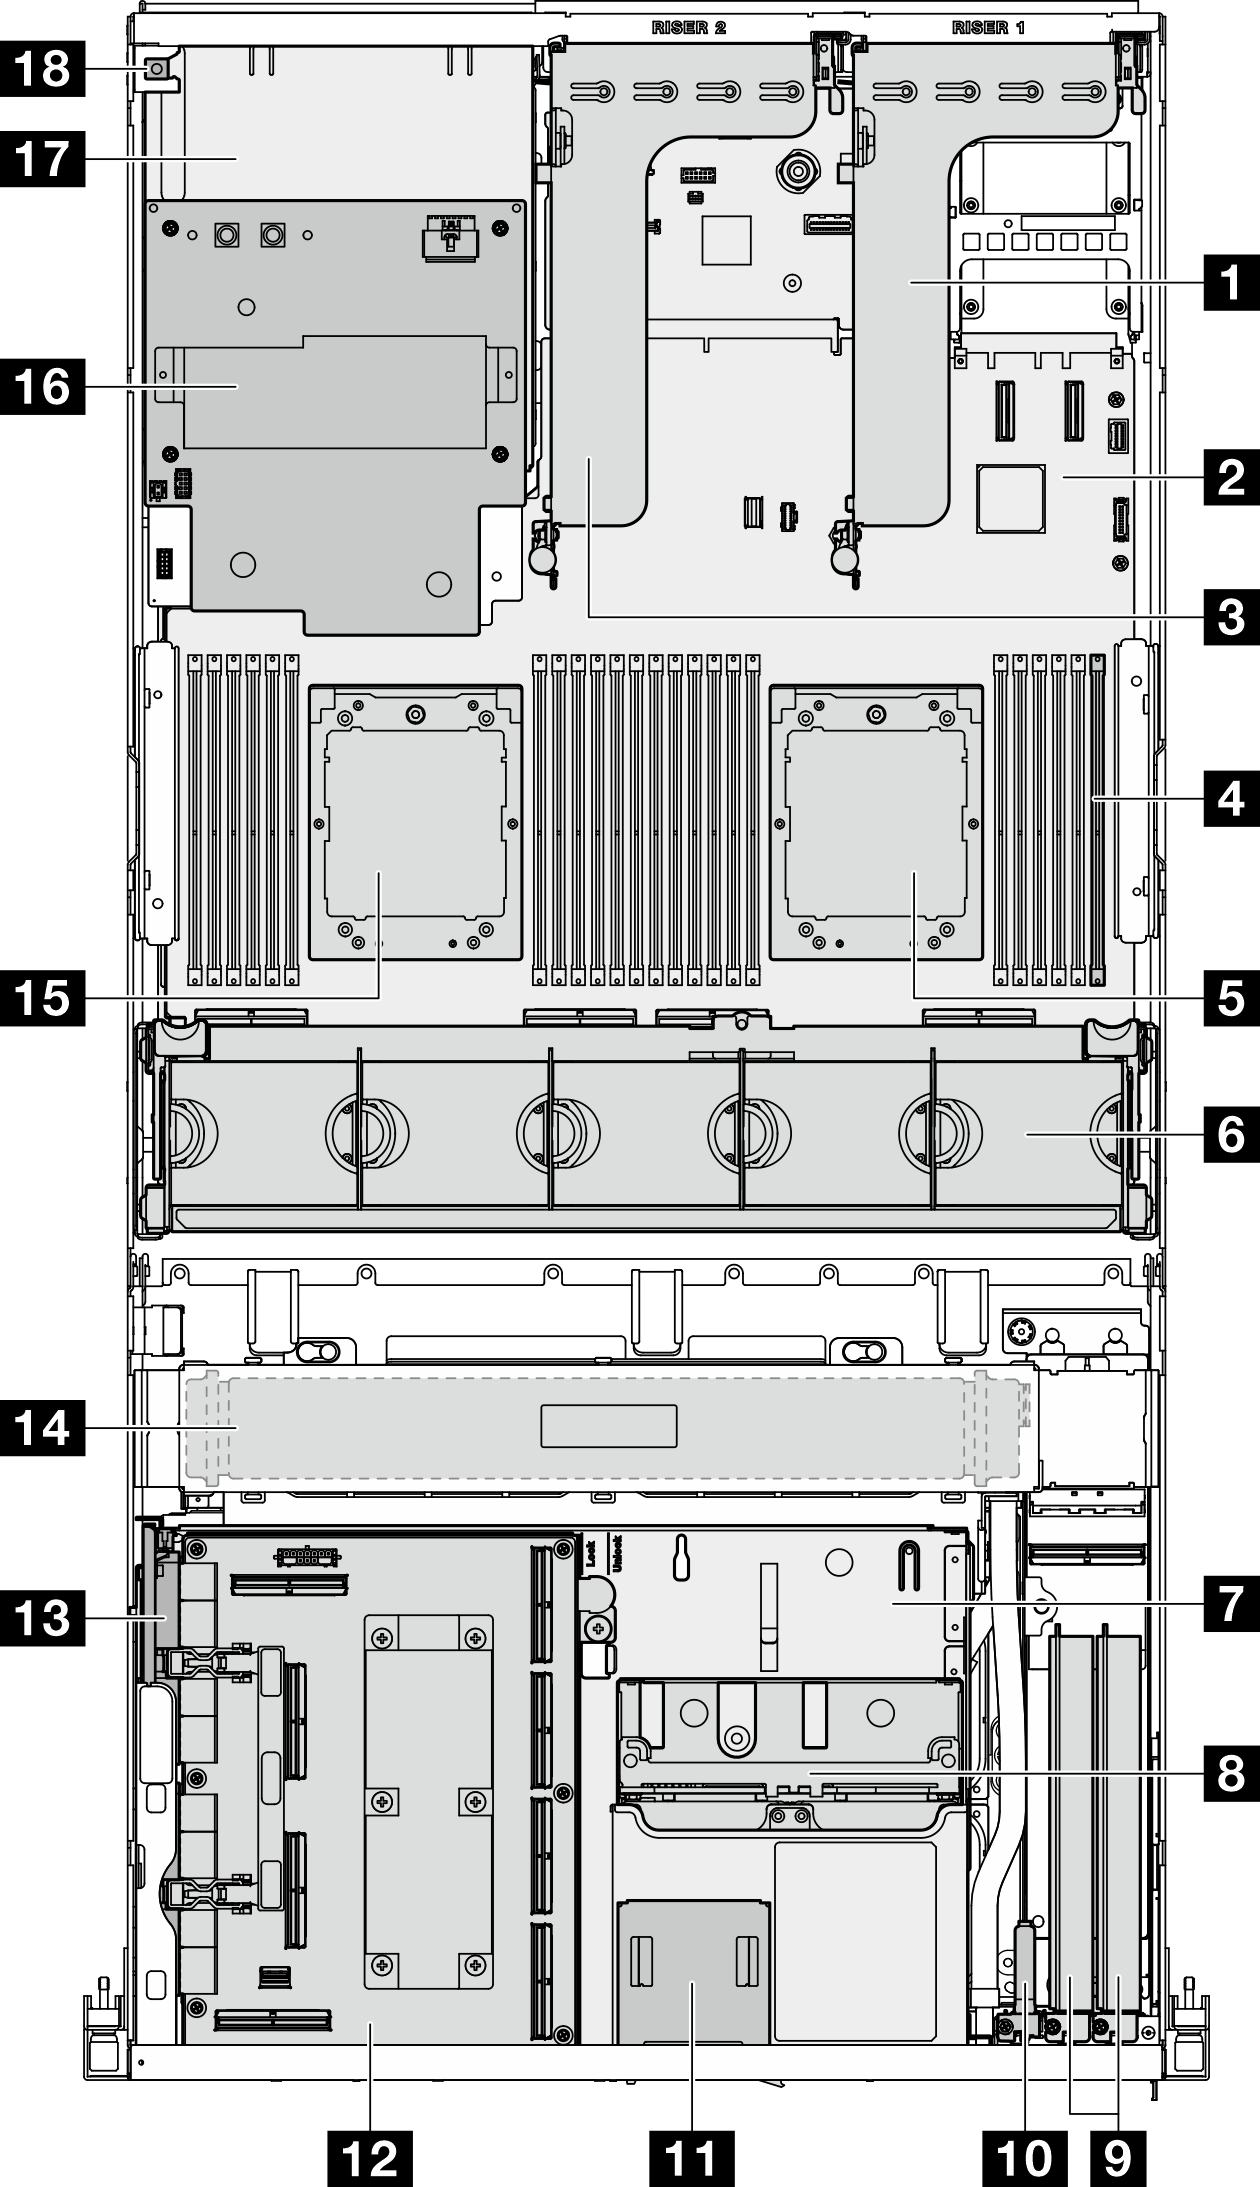 Top view with 4x 2.5-inch drives and Scheda dello switch PCIe SXM5